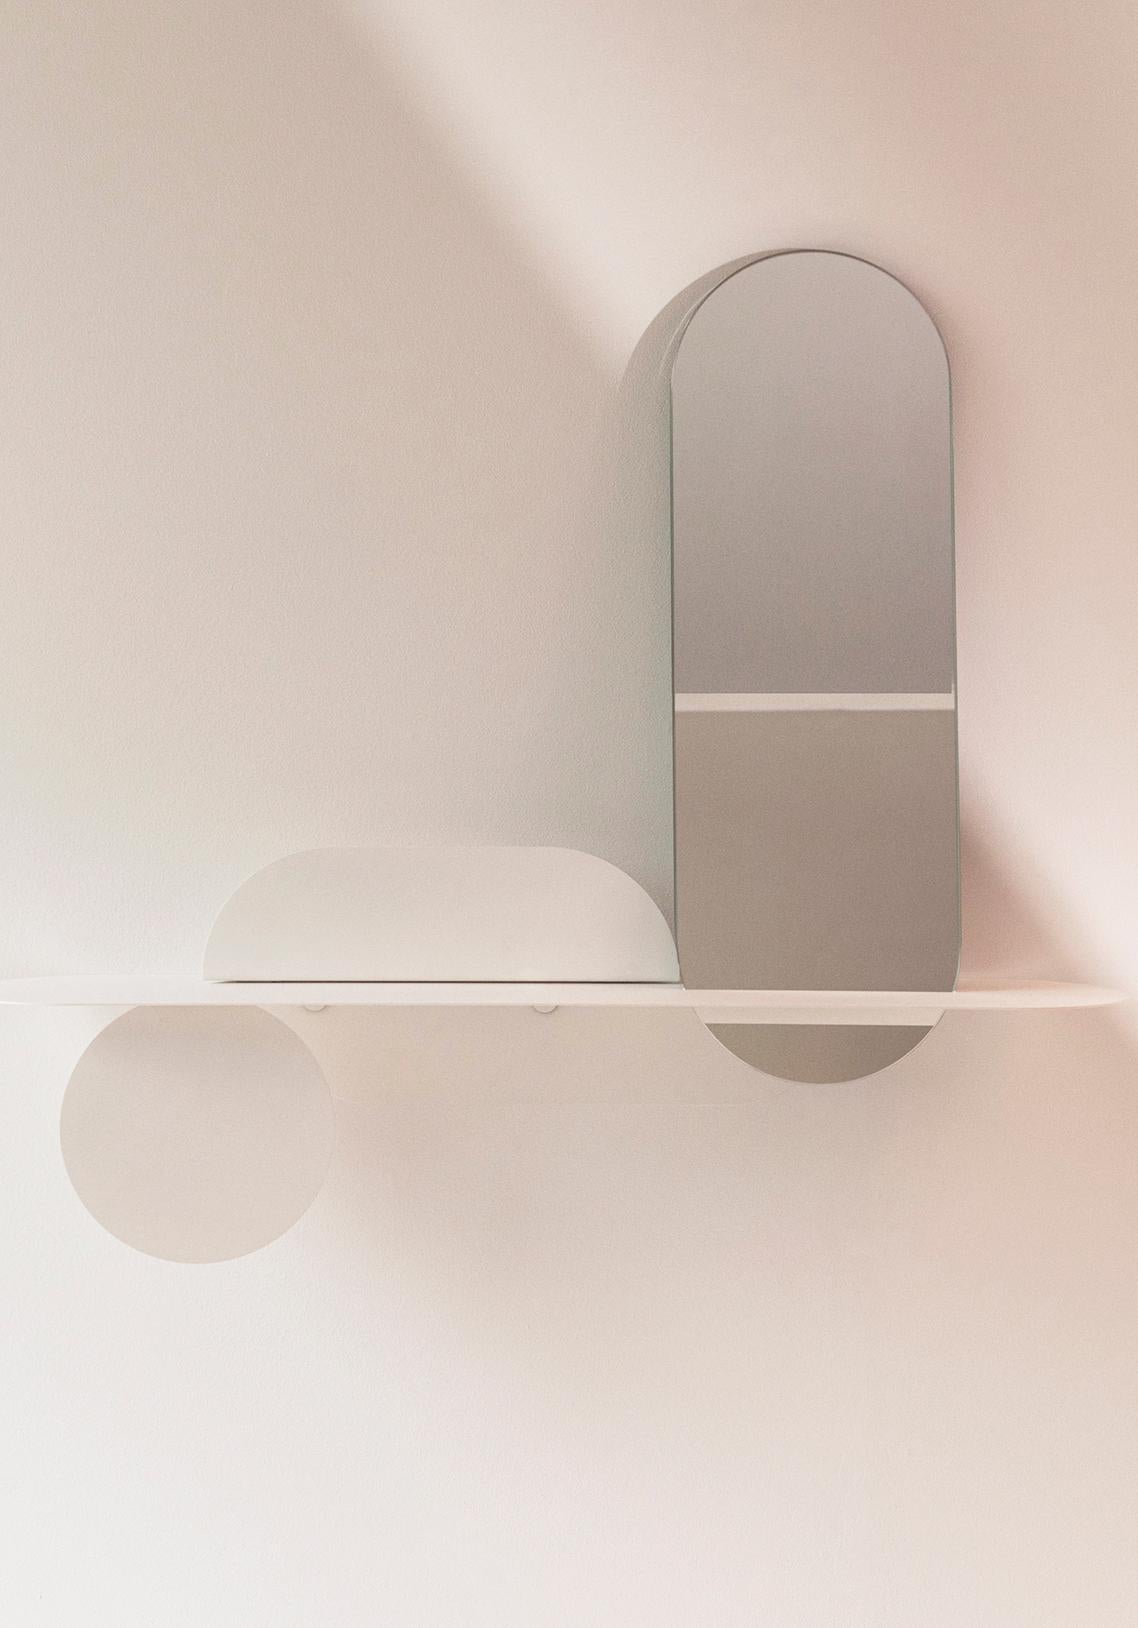 Simply White Shelf With Mirror by Mademoiselle Jo
Dimensions: L 87 x W 20 cm.
Materials: Matte white steel and mirror.

Available in two versions and two colors. Please contact us.

Behind SIMPLY is actually a much more sophisticated object than its